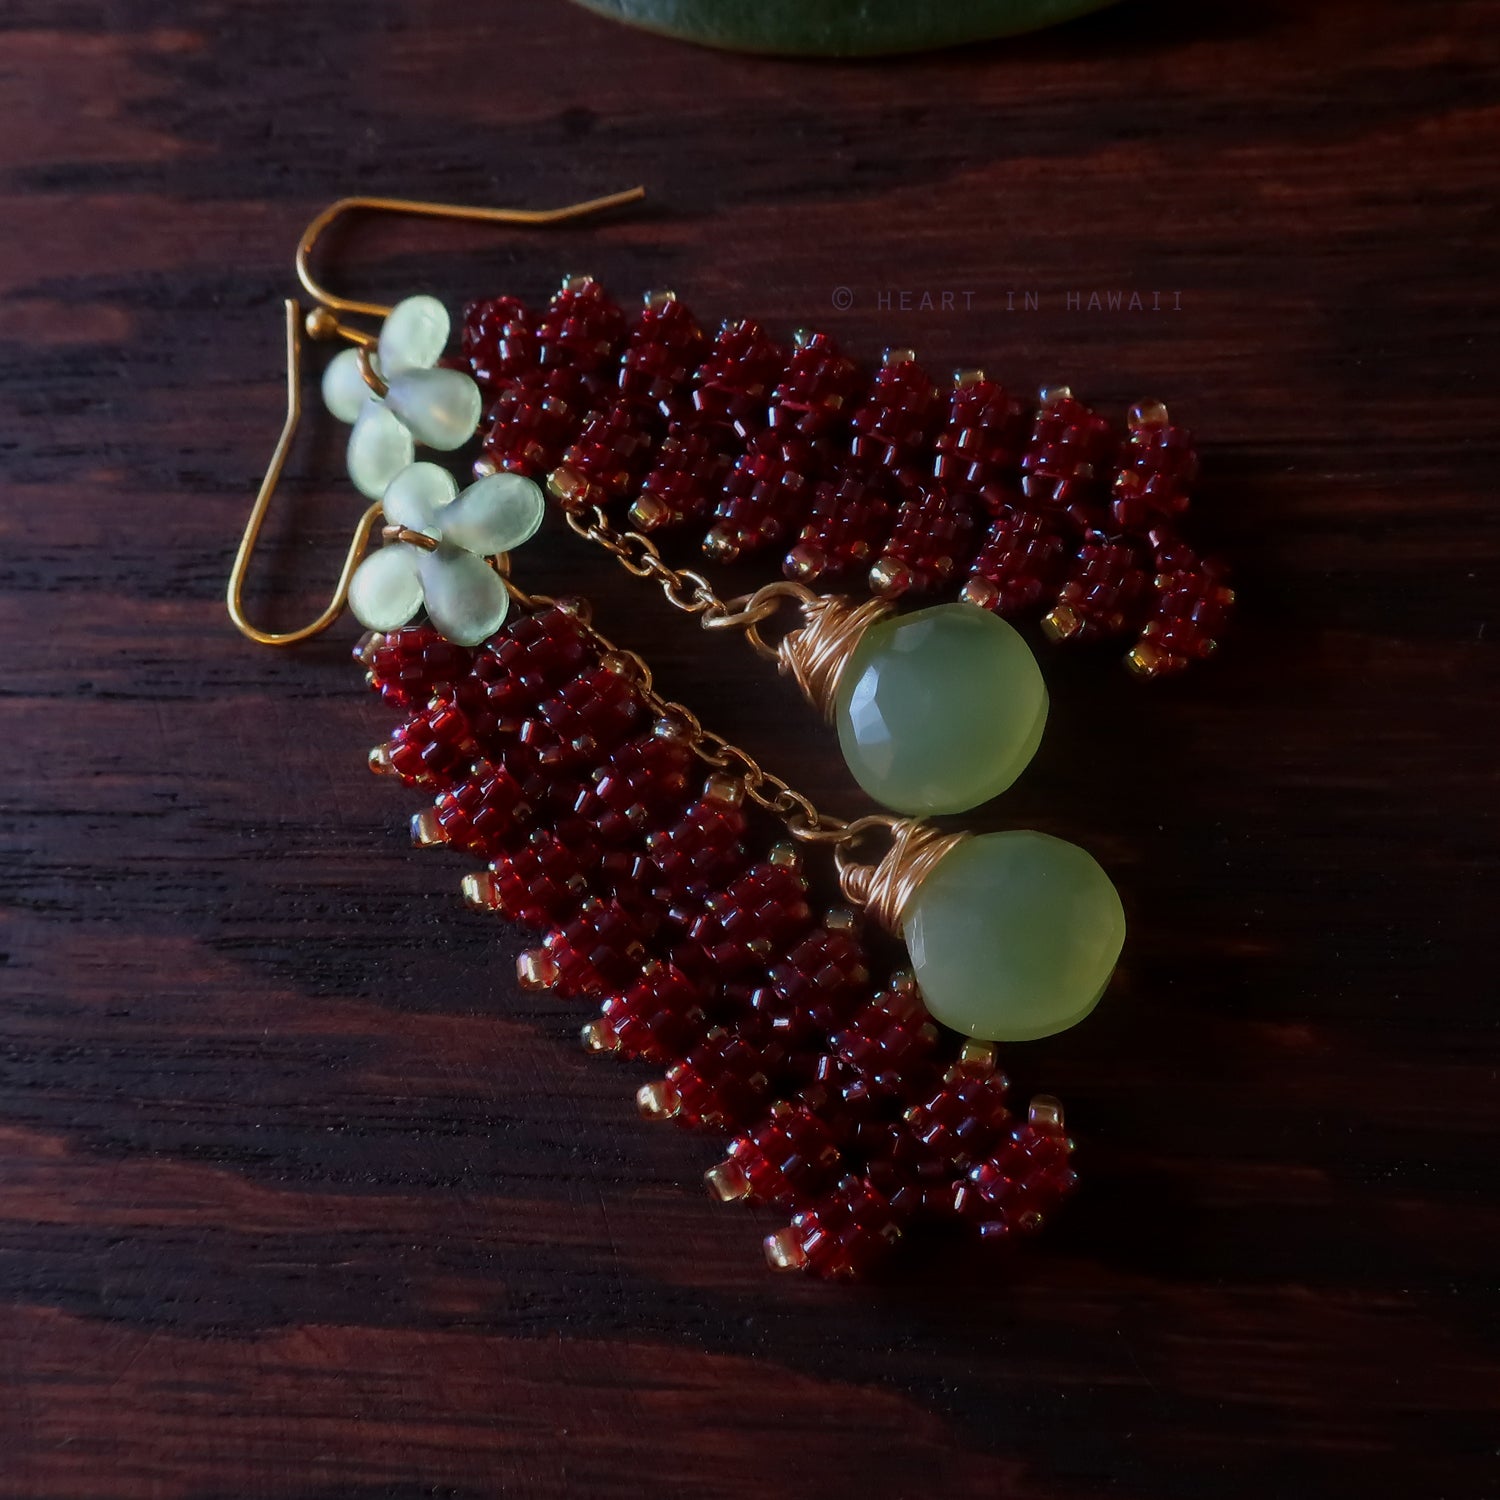 Heart in Hawaii Extra Long Beaded Heliconia Earrings with Chalcedony